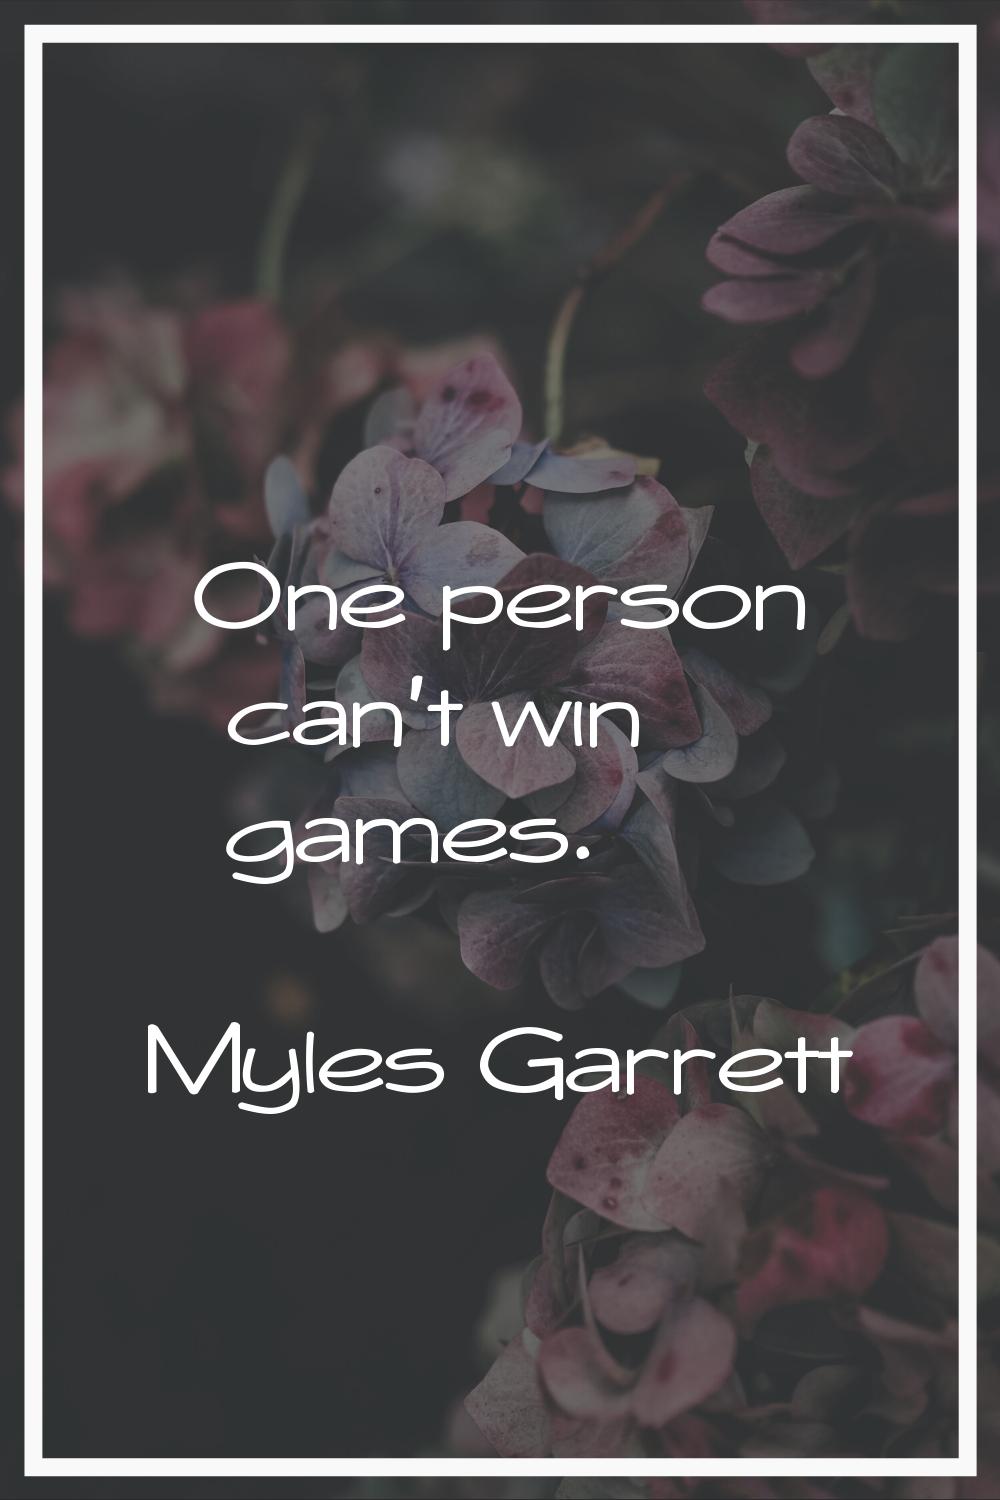 One person can't win games.